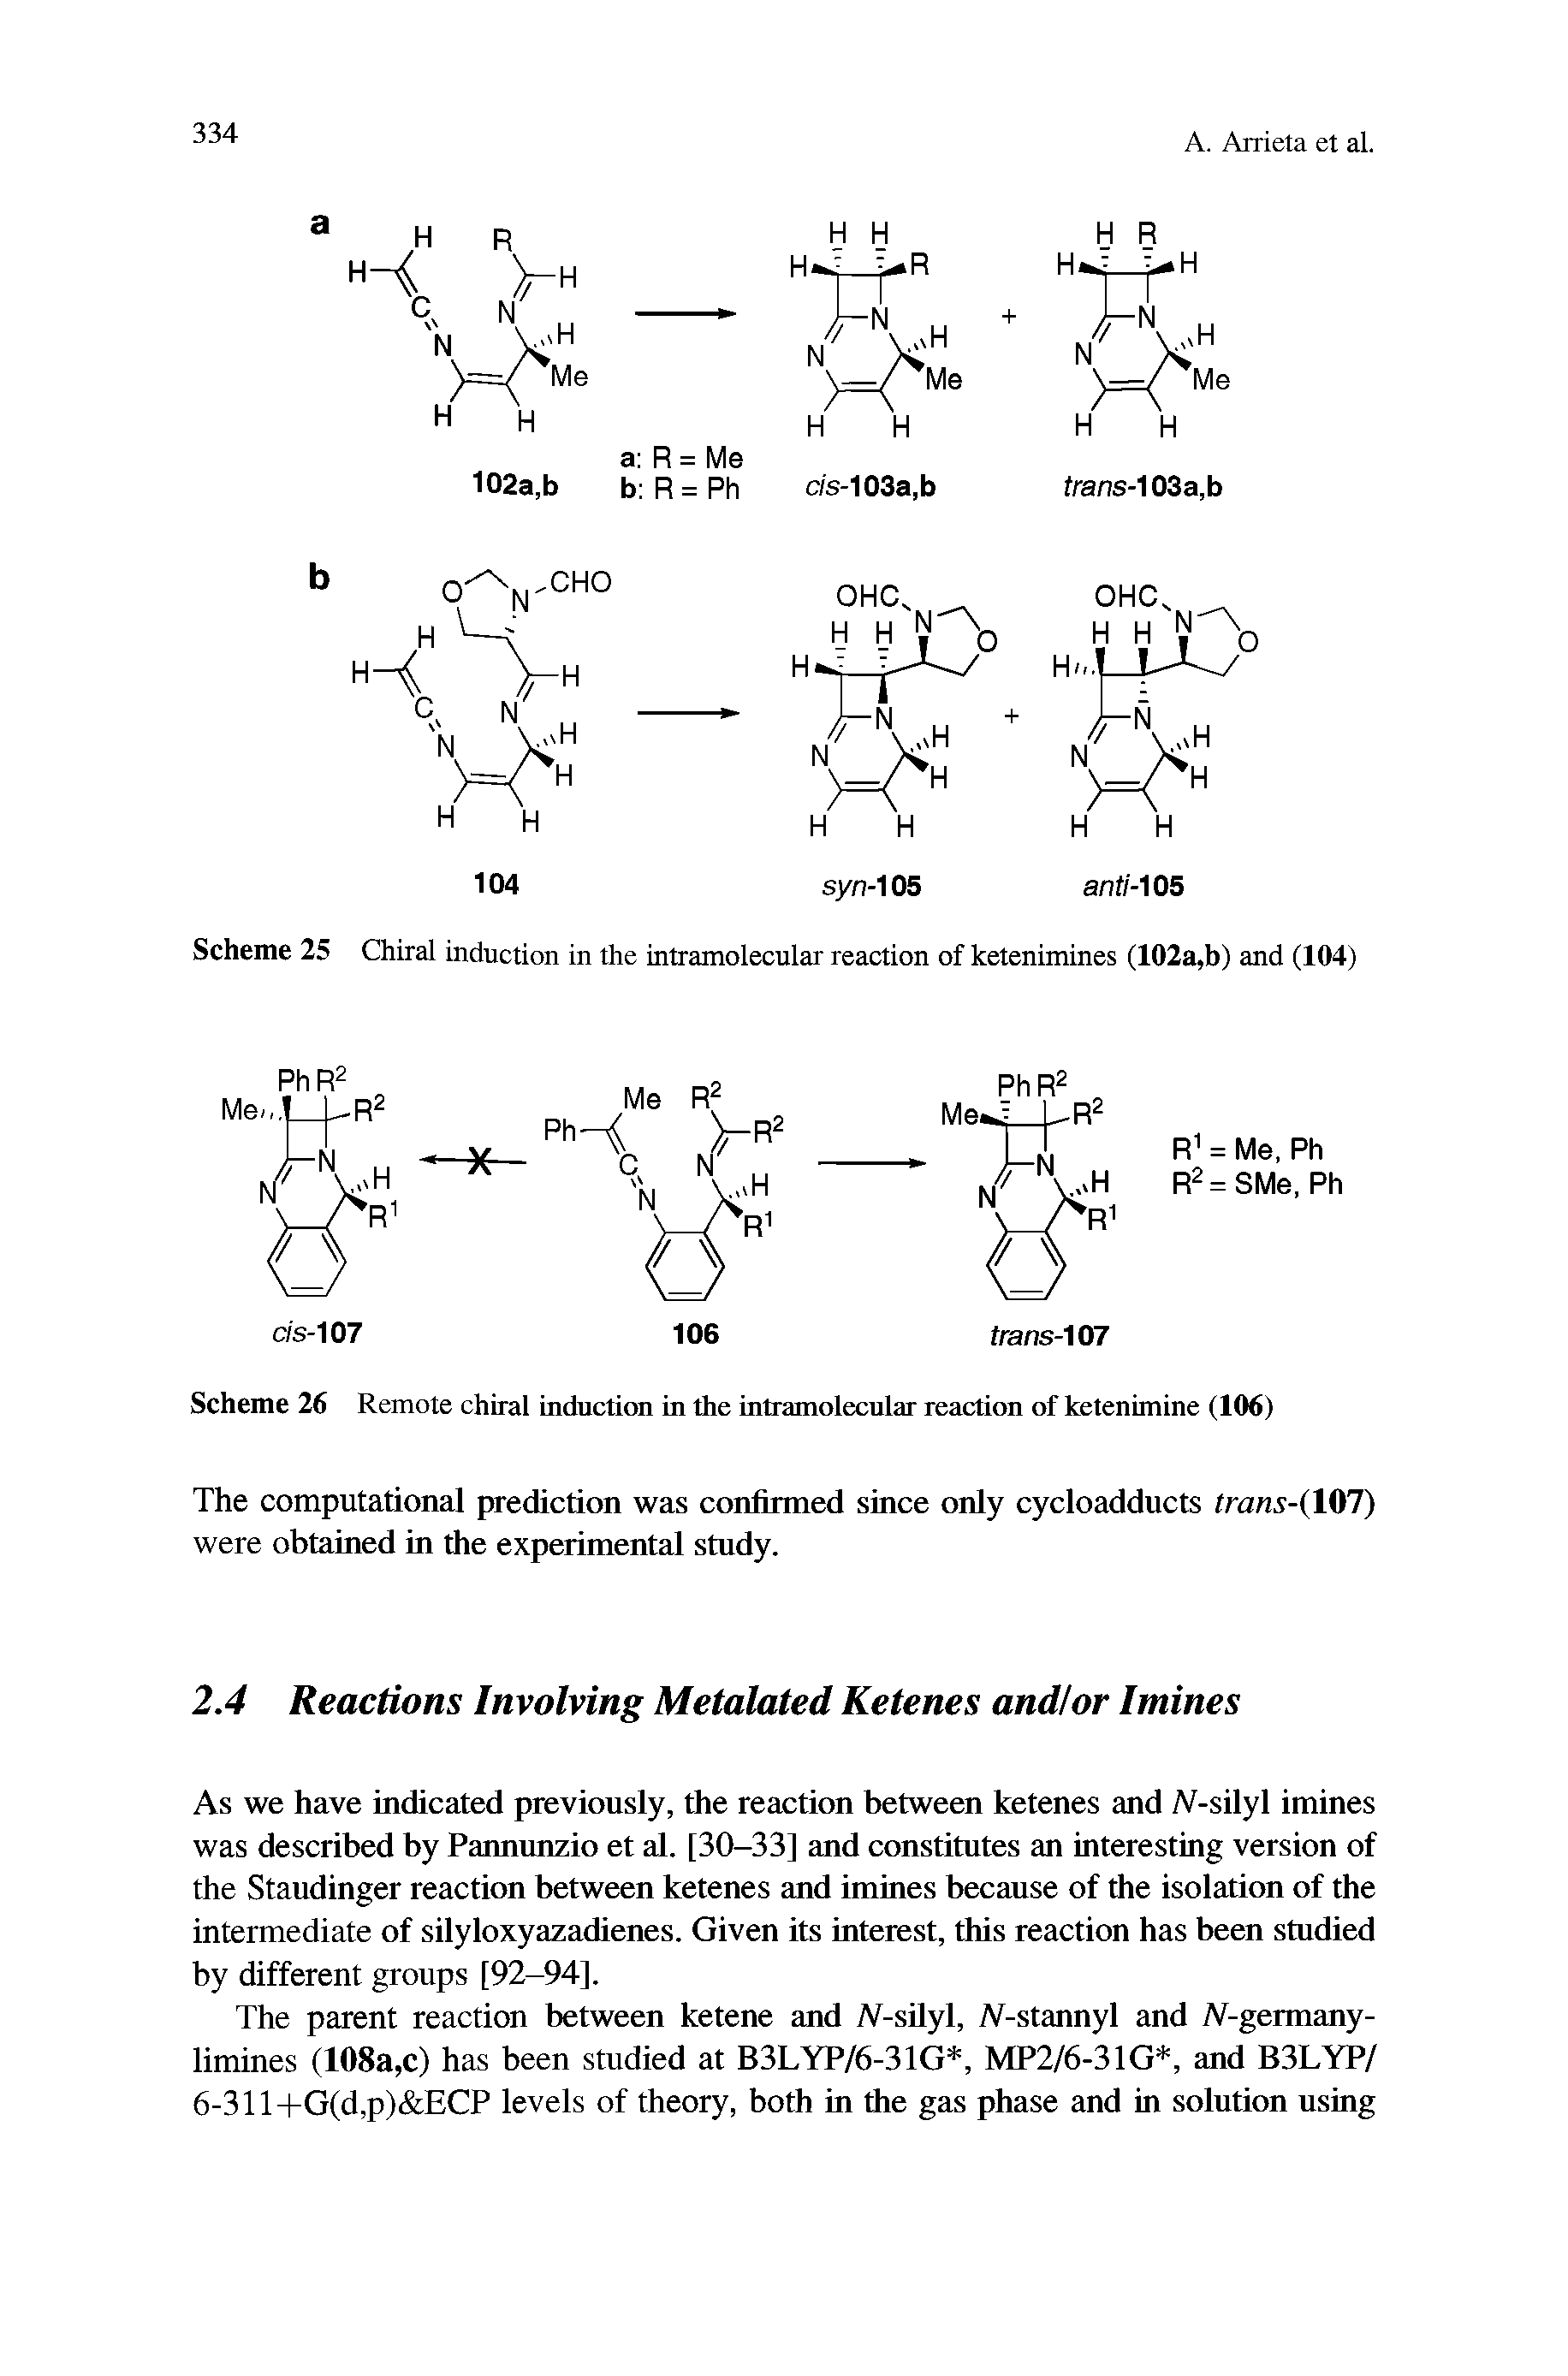 Scheme 25 Chiral induction in the intramolecular reaction of ketenimines (102a,b) and (104)...